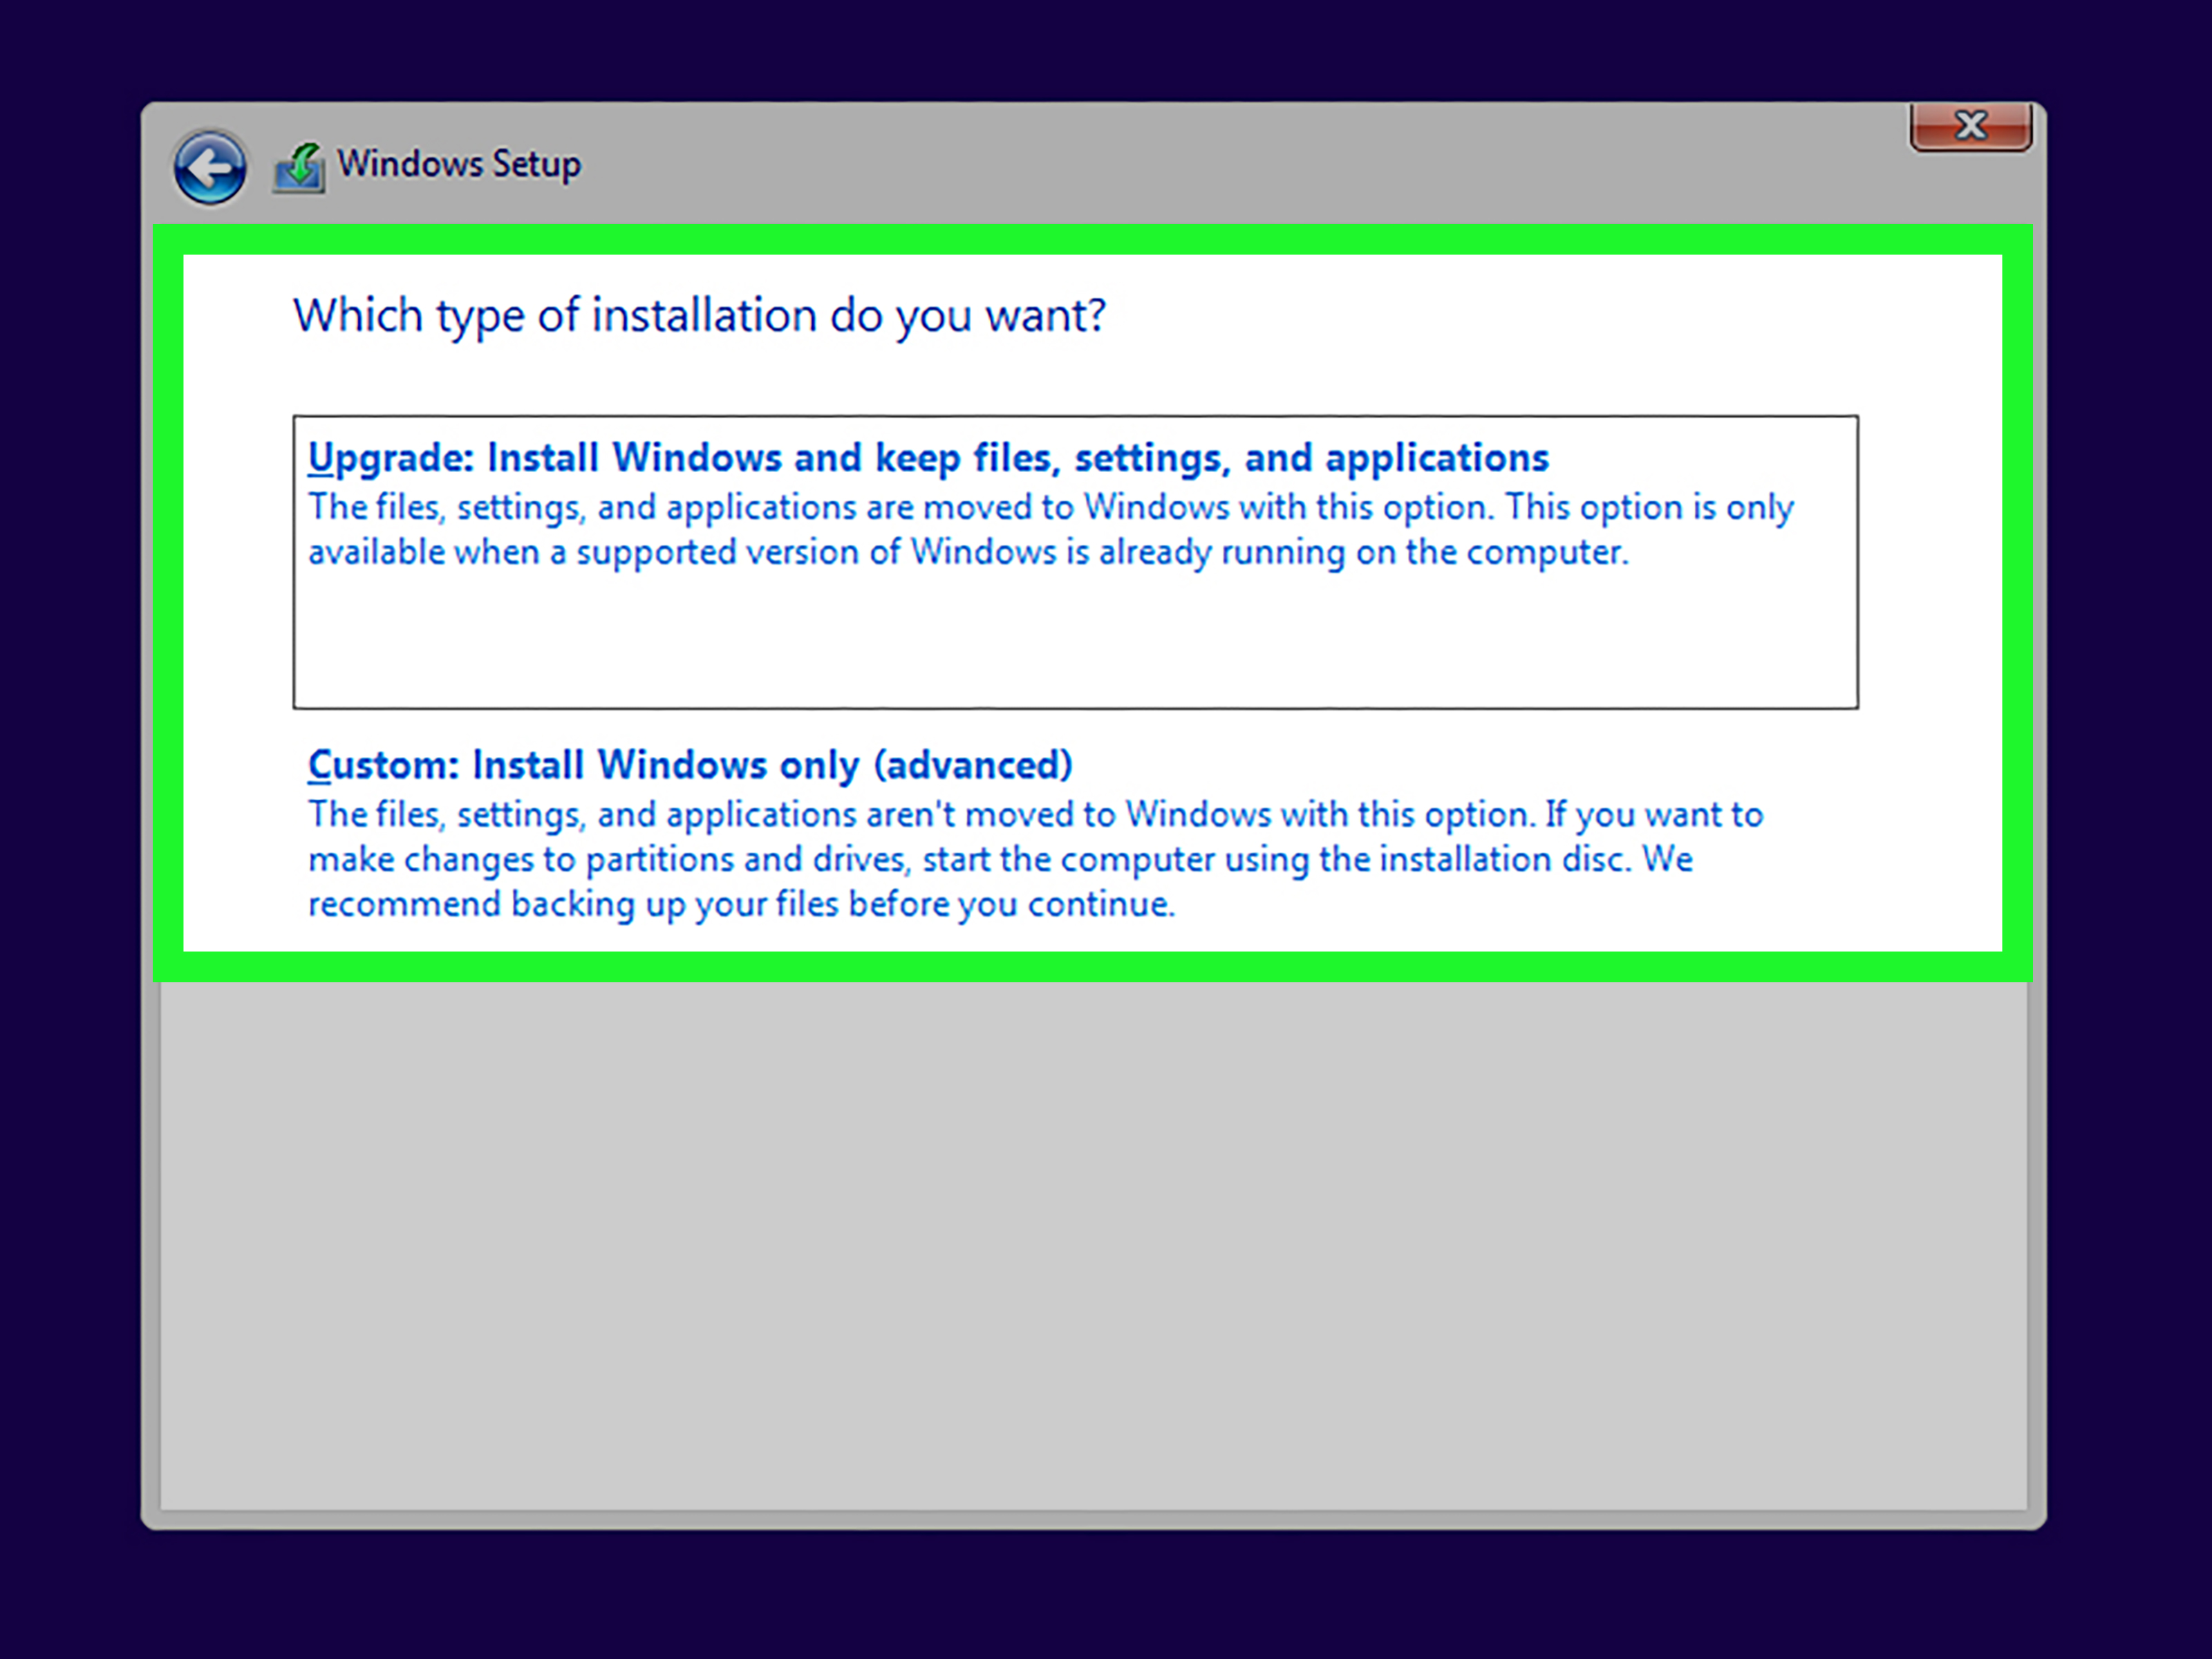 Restart your computer and boot from the installation media or USB drive
Follow the prompts to perform a clean installation of Windows